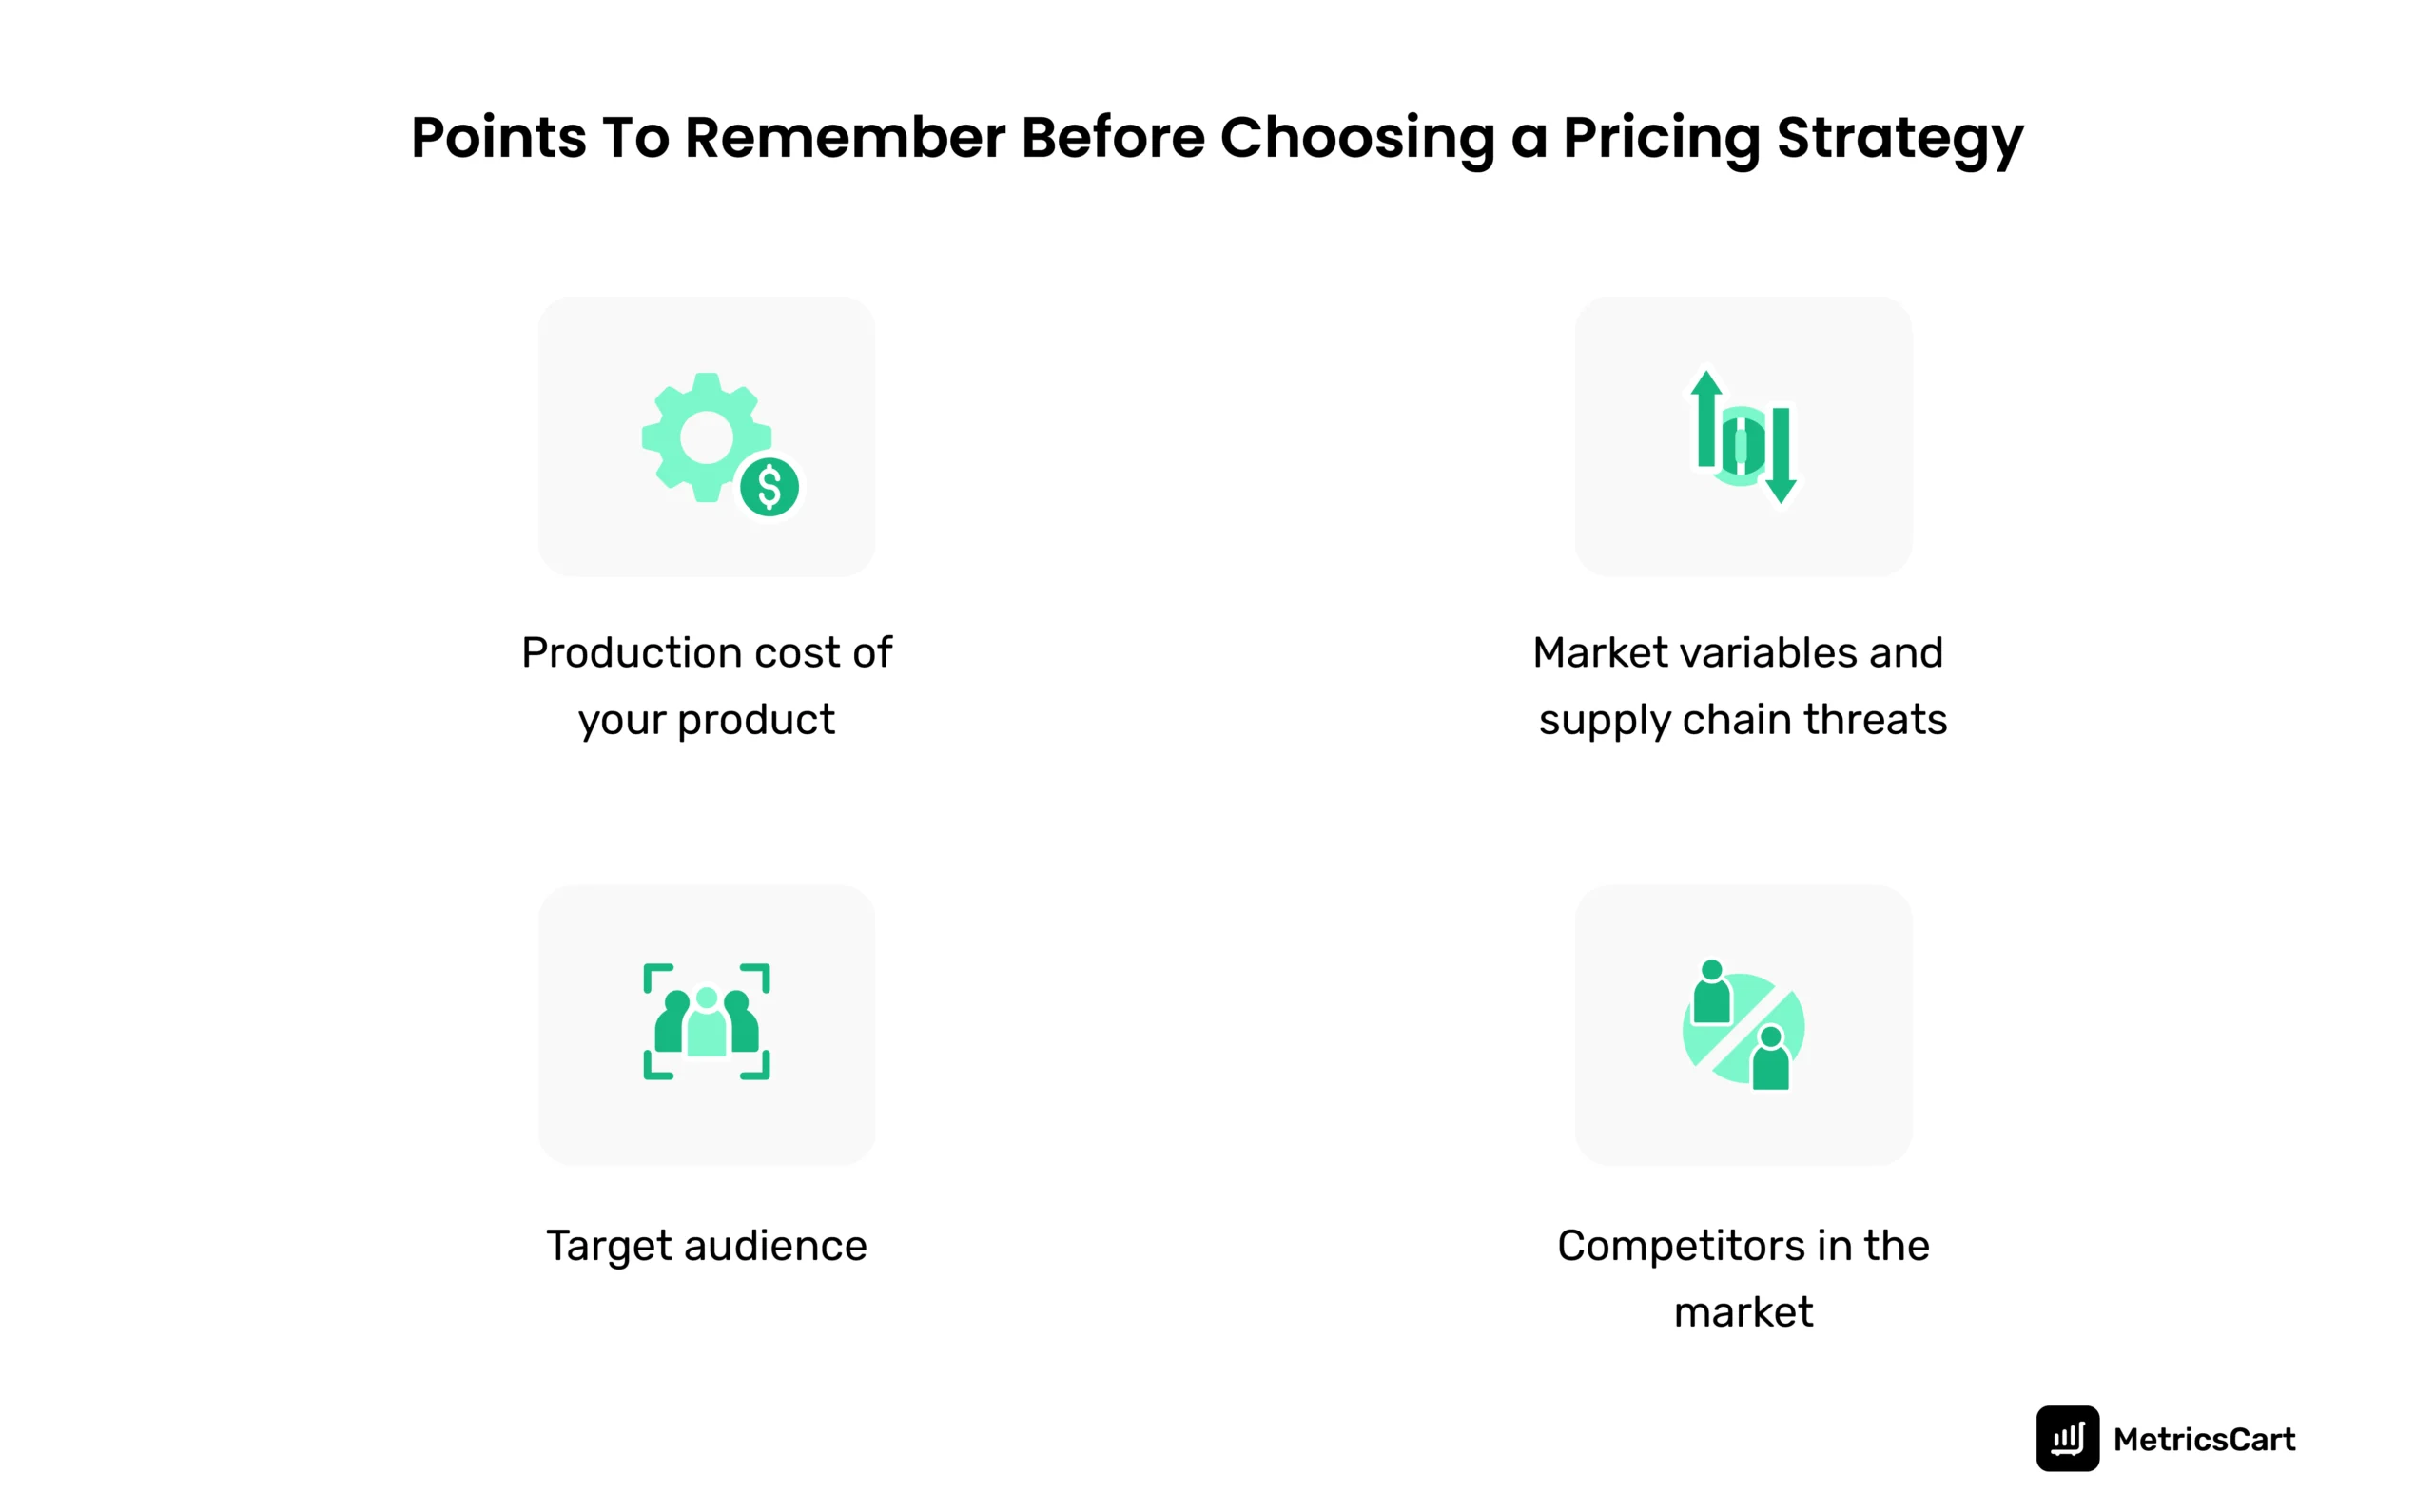 The important factors to consider when choosing a pricing strategy